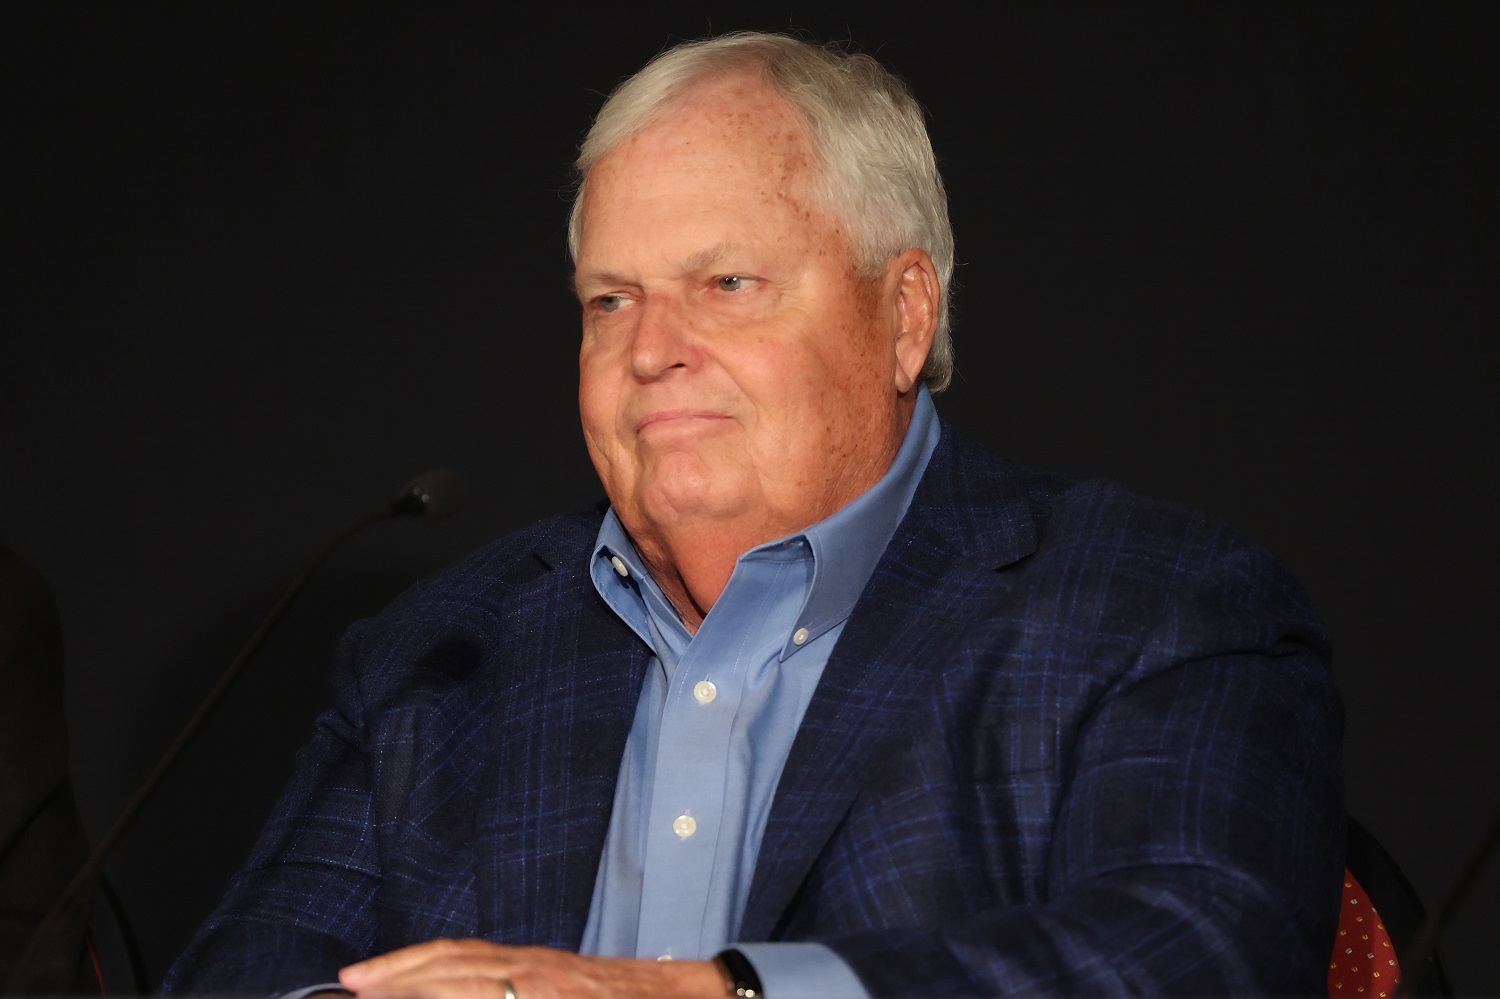 Hendrick Motorsports owner Rick Hendrick attends the NASCAR, IMSA, and Hendrick Motorsports press conference for the Garage 56 entry at the 2023 24 Hours of Le Mans announcement.